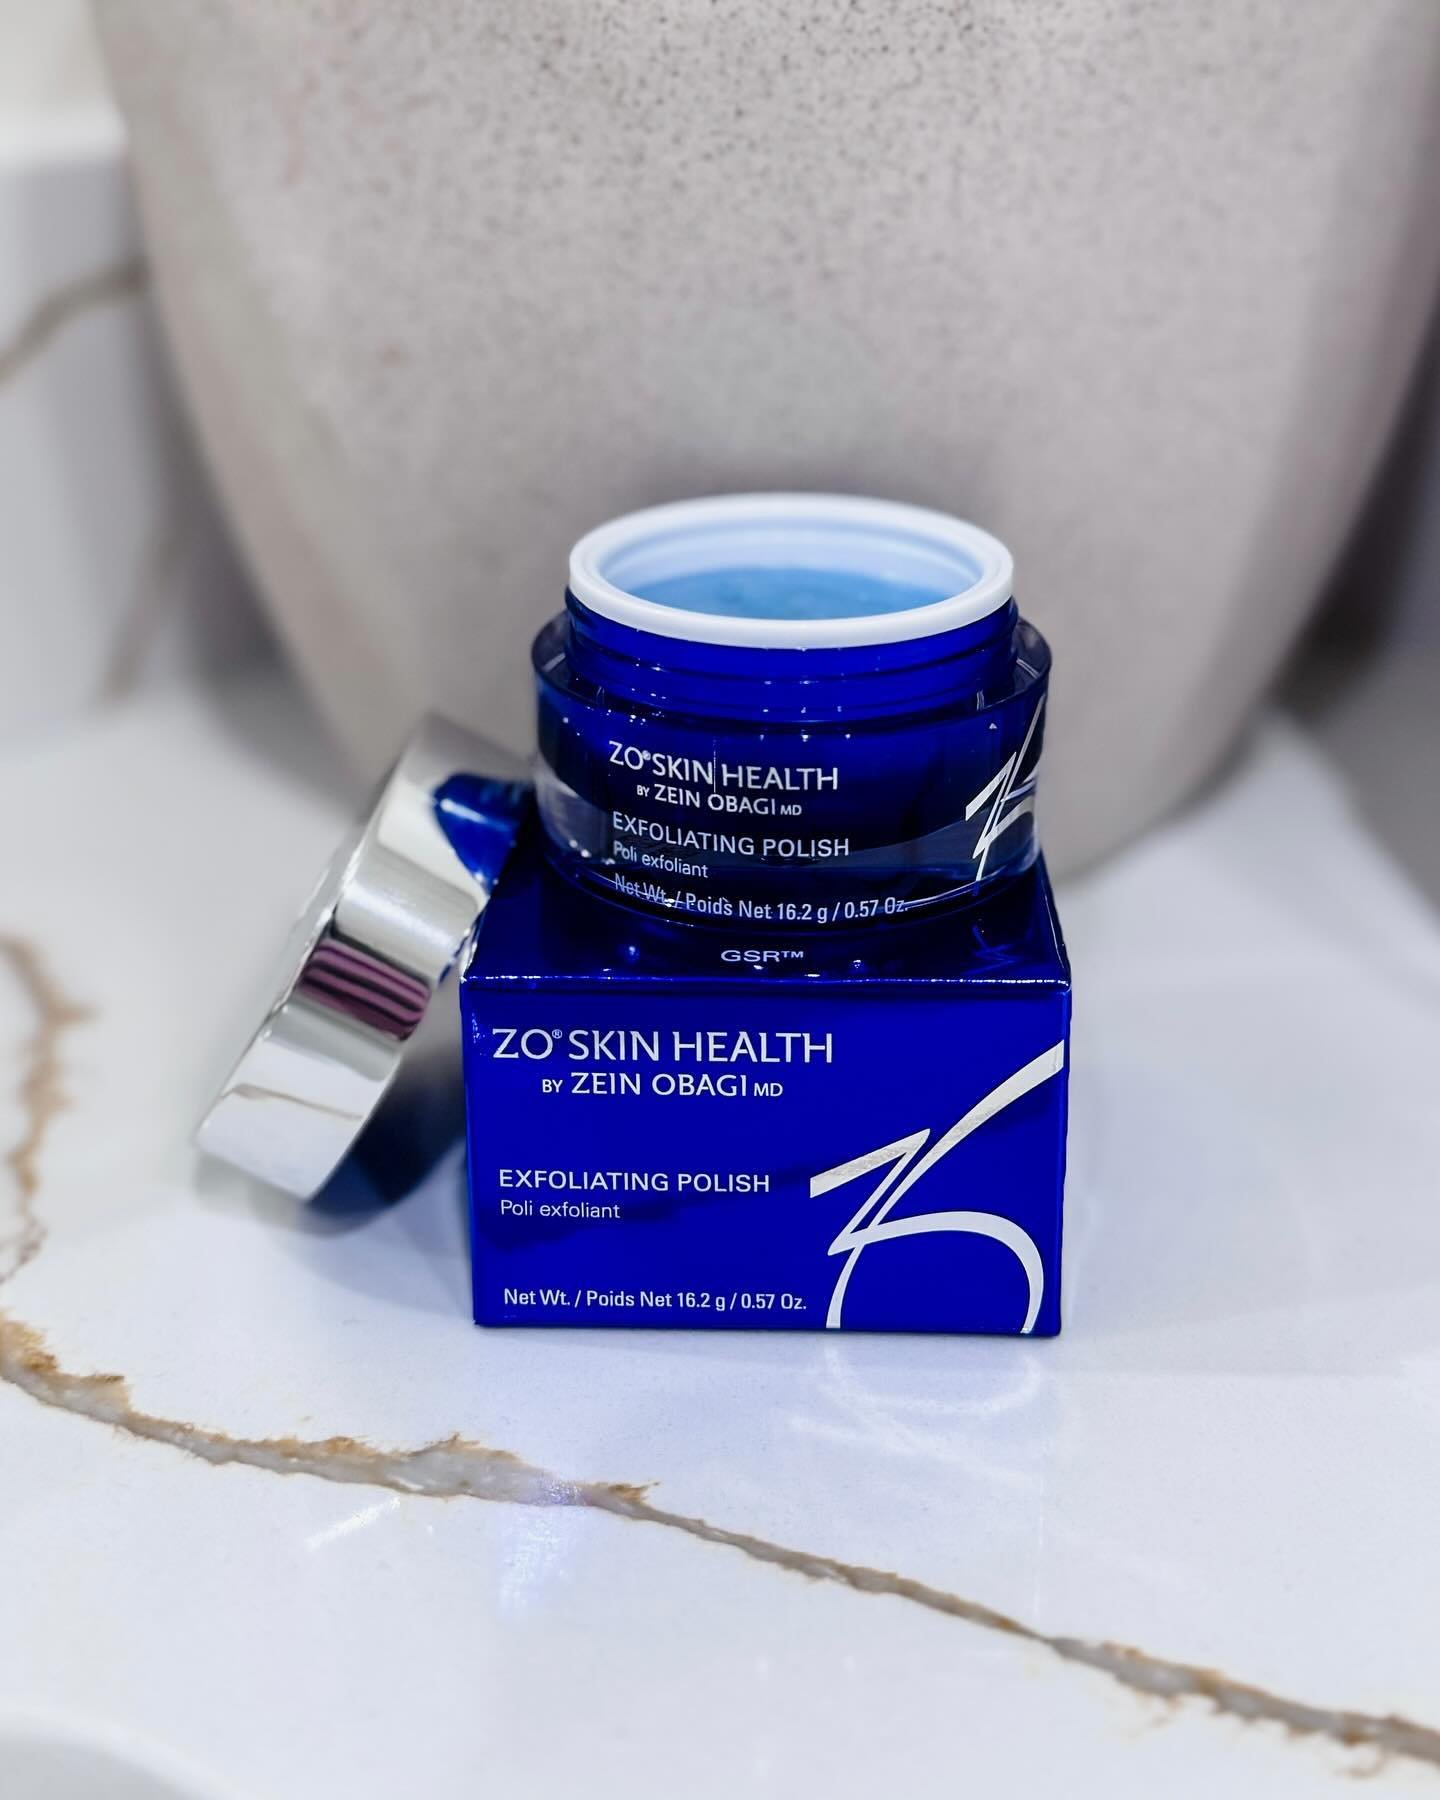 Named one of the 6 Best Face Scrubs to Exfoliate Your Way to Smooth Skin by @goodhousekeeping!

Benefits:

💙 Physically exfoliates off dead skin cells and other debris to improve skin radiance

💙 Magnesium Oxide Crystals wash away clean, leaving sk